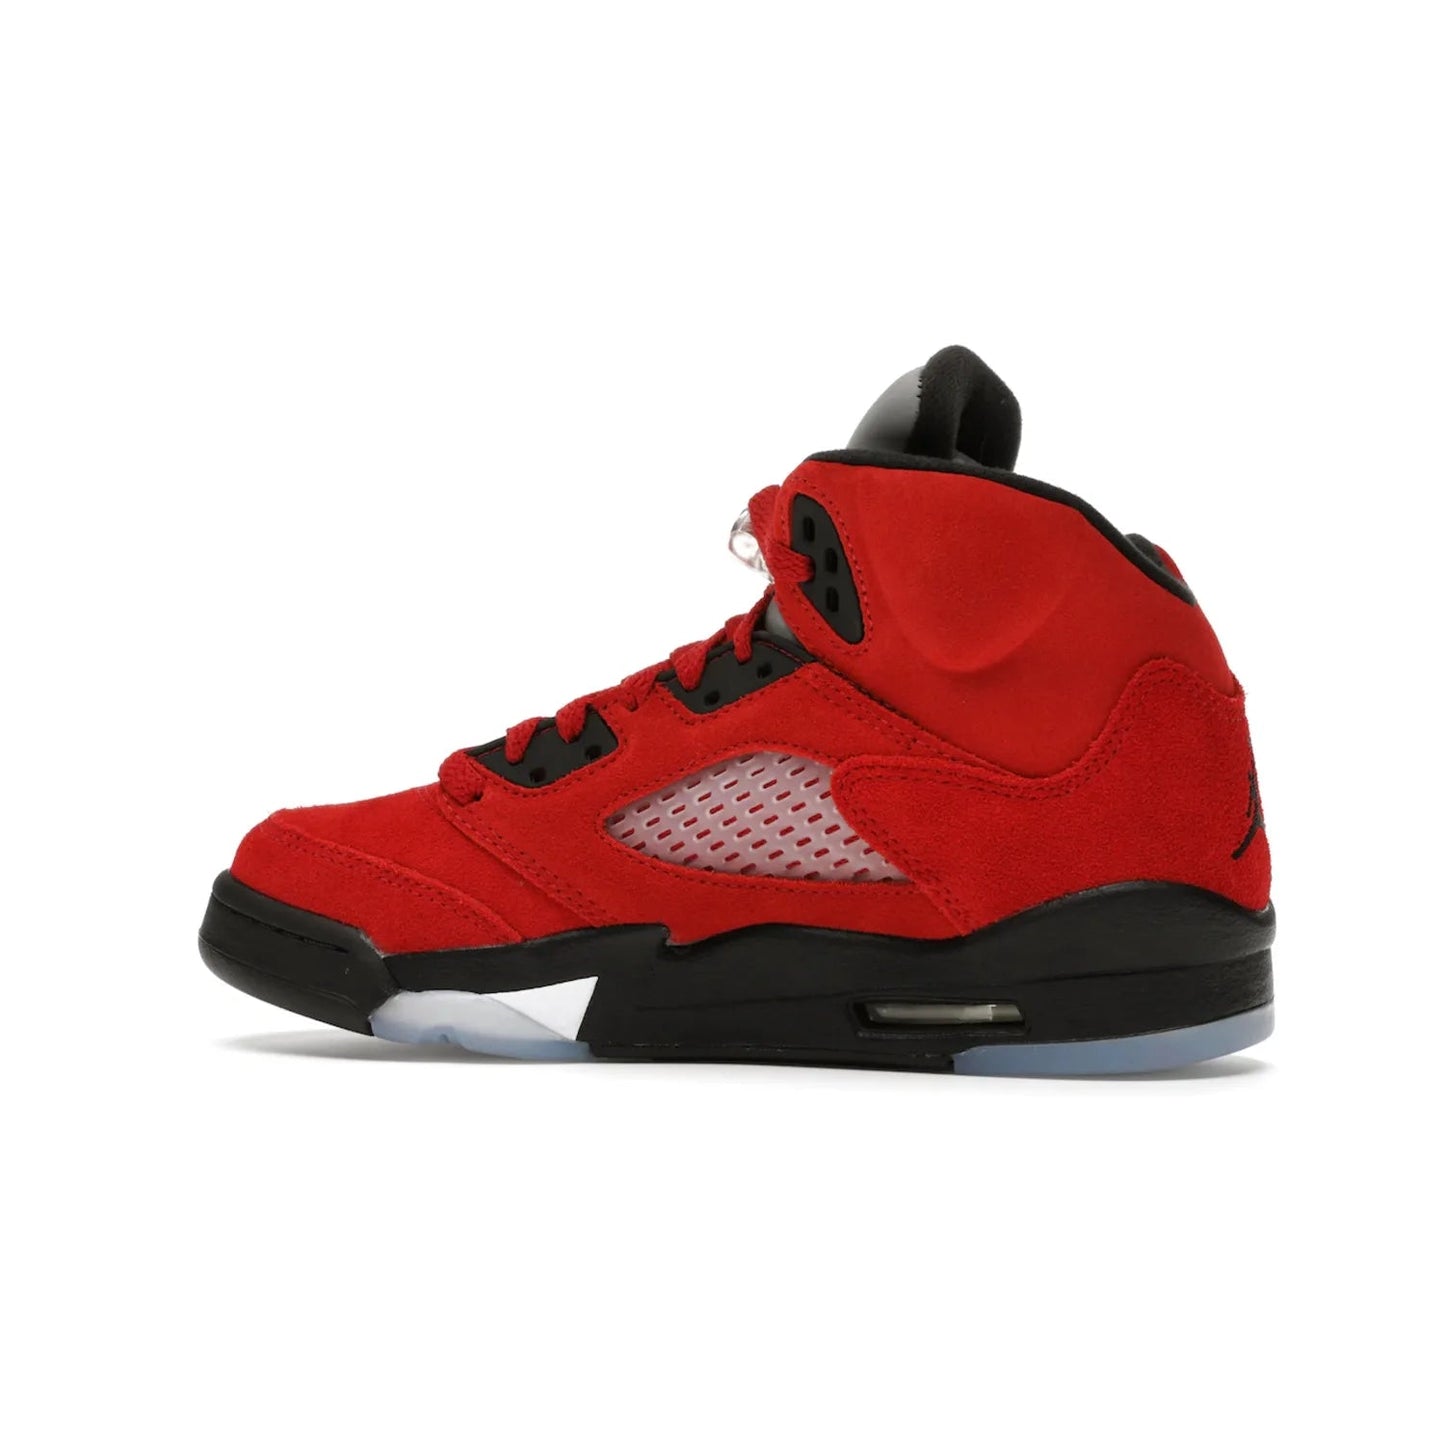 Jordan 5 Retro Raging Bull Red (2021) (GS) - Image 21 - Only at www.BallersClubKickz.com - Jordan 5 Retro Raging Bulls Red 2021 GS. Varsity Red suede upper with embroidered number 23, black leather detail, red laces, and midsole with air cushioning. Jumpman logos on tongue, heel, and outsole. On-trend streetwear and basketball style. Released April 10, 2021.